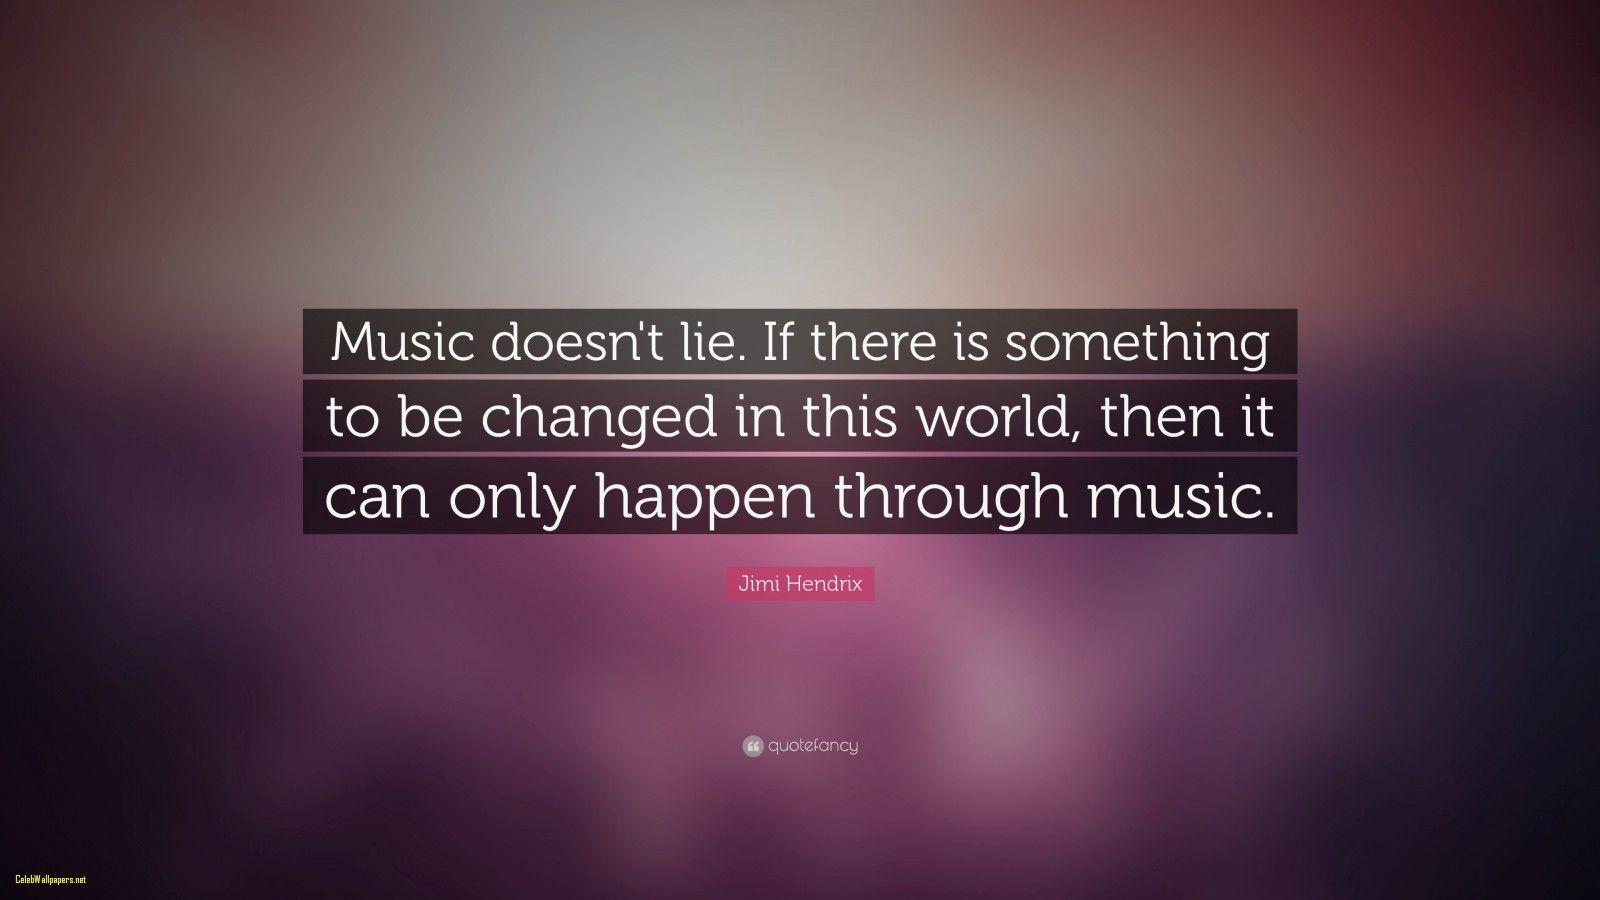 Music Quotes Wallpaper Quotefancy Picture Quotes